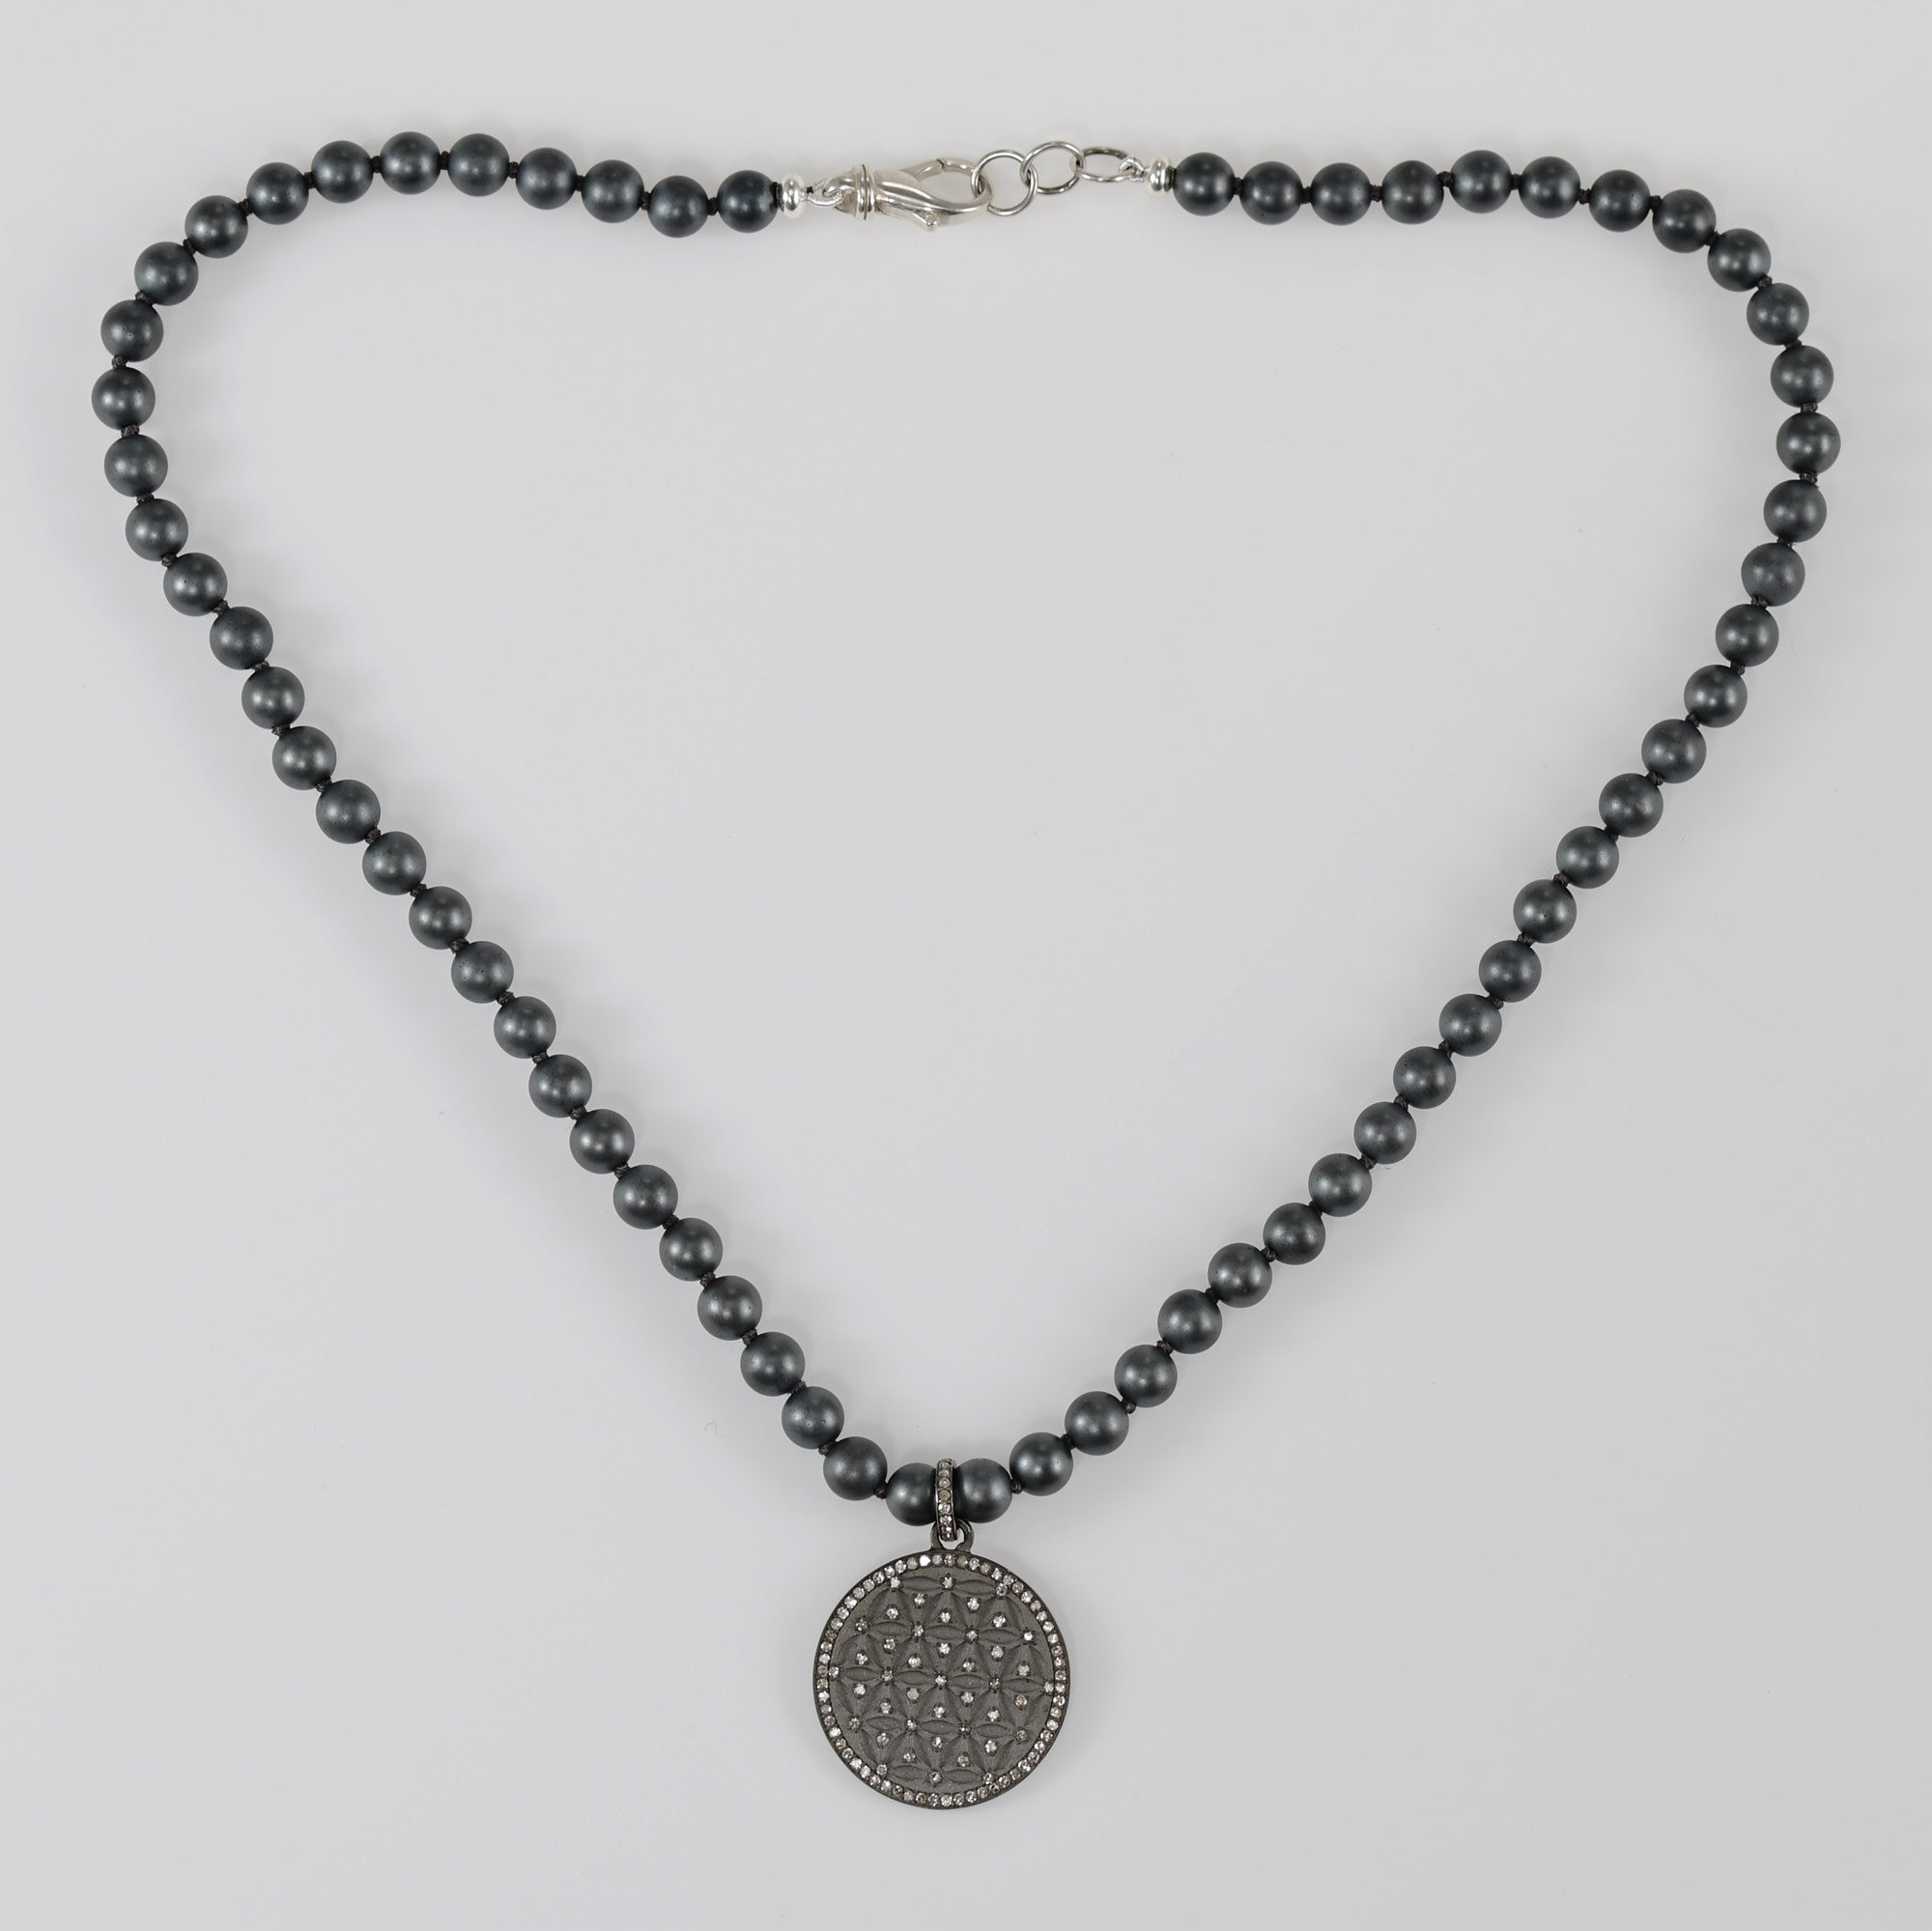 Matte finish everyday necklace of Hematine,Diamond and Silver